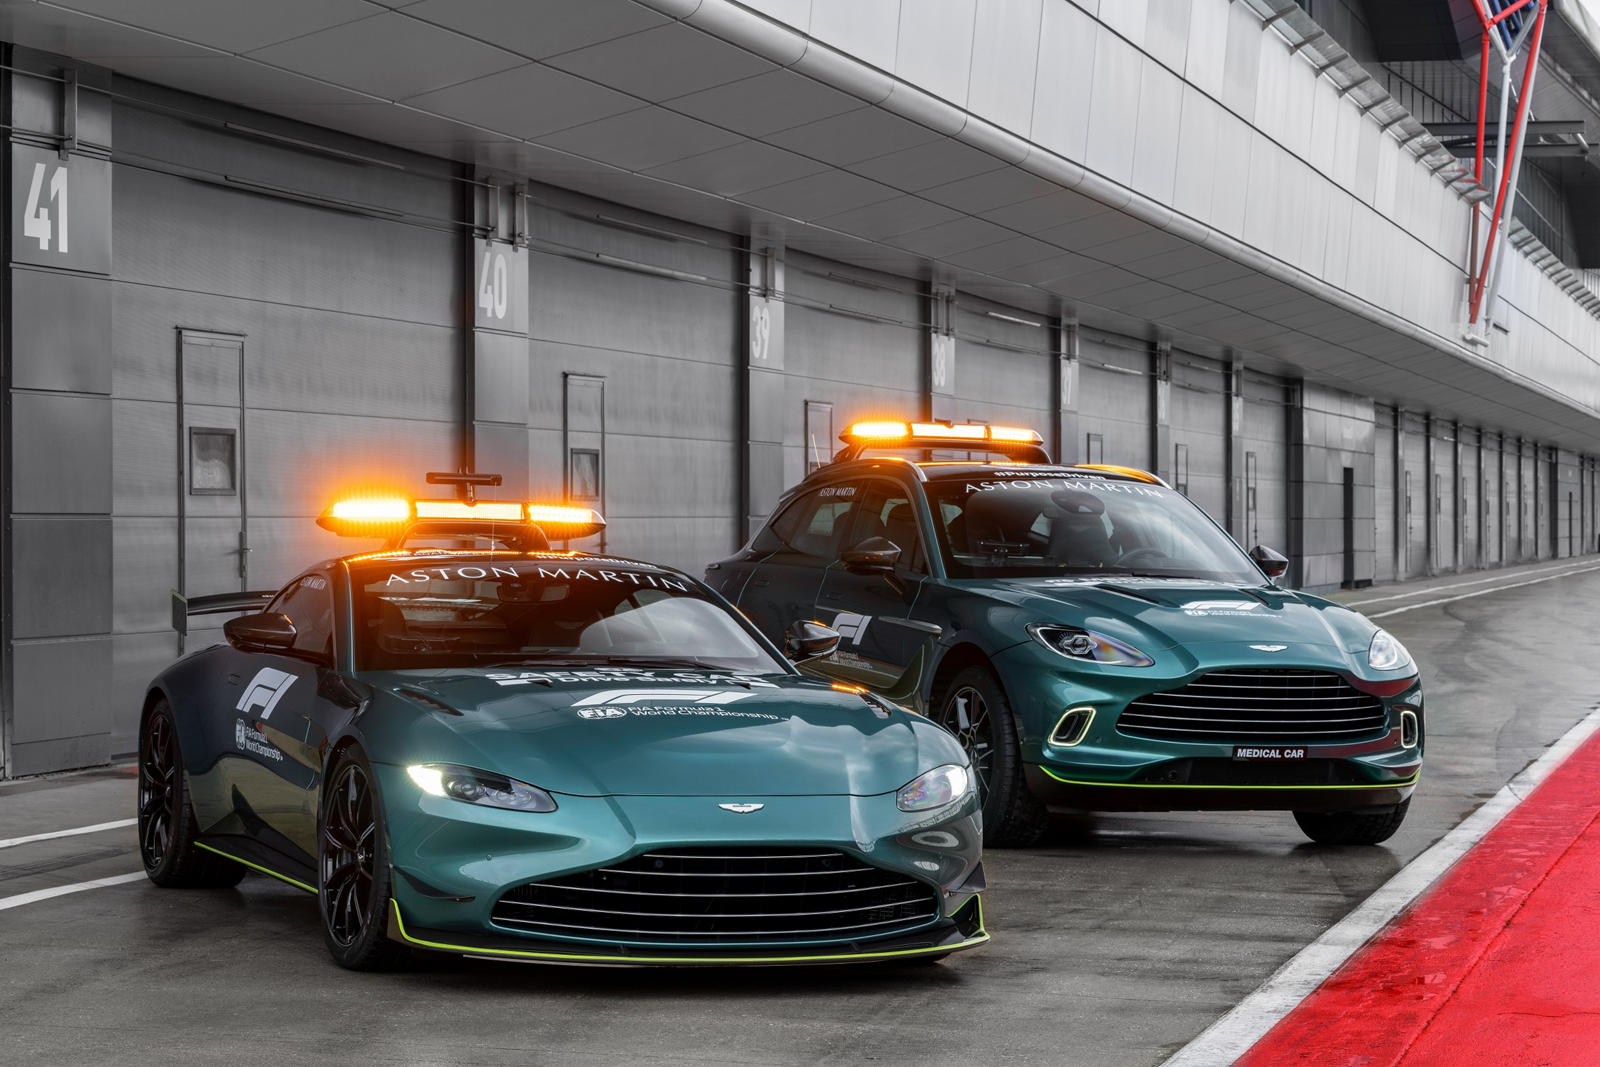 Aston Martin Vantage announced as official F1 safety car as the DBX becomes the Medical car